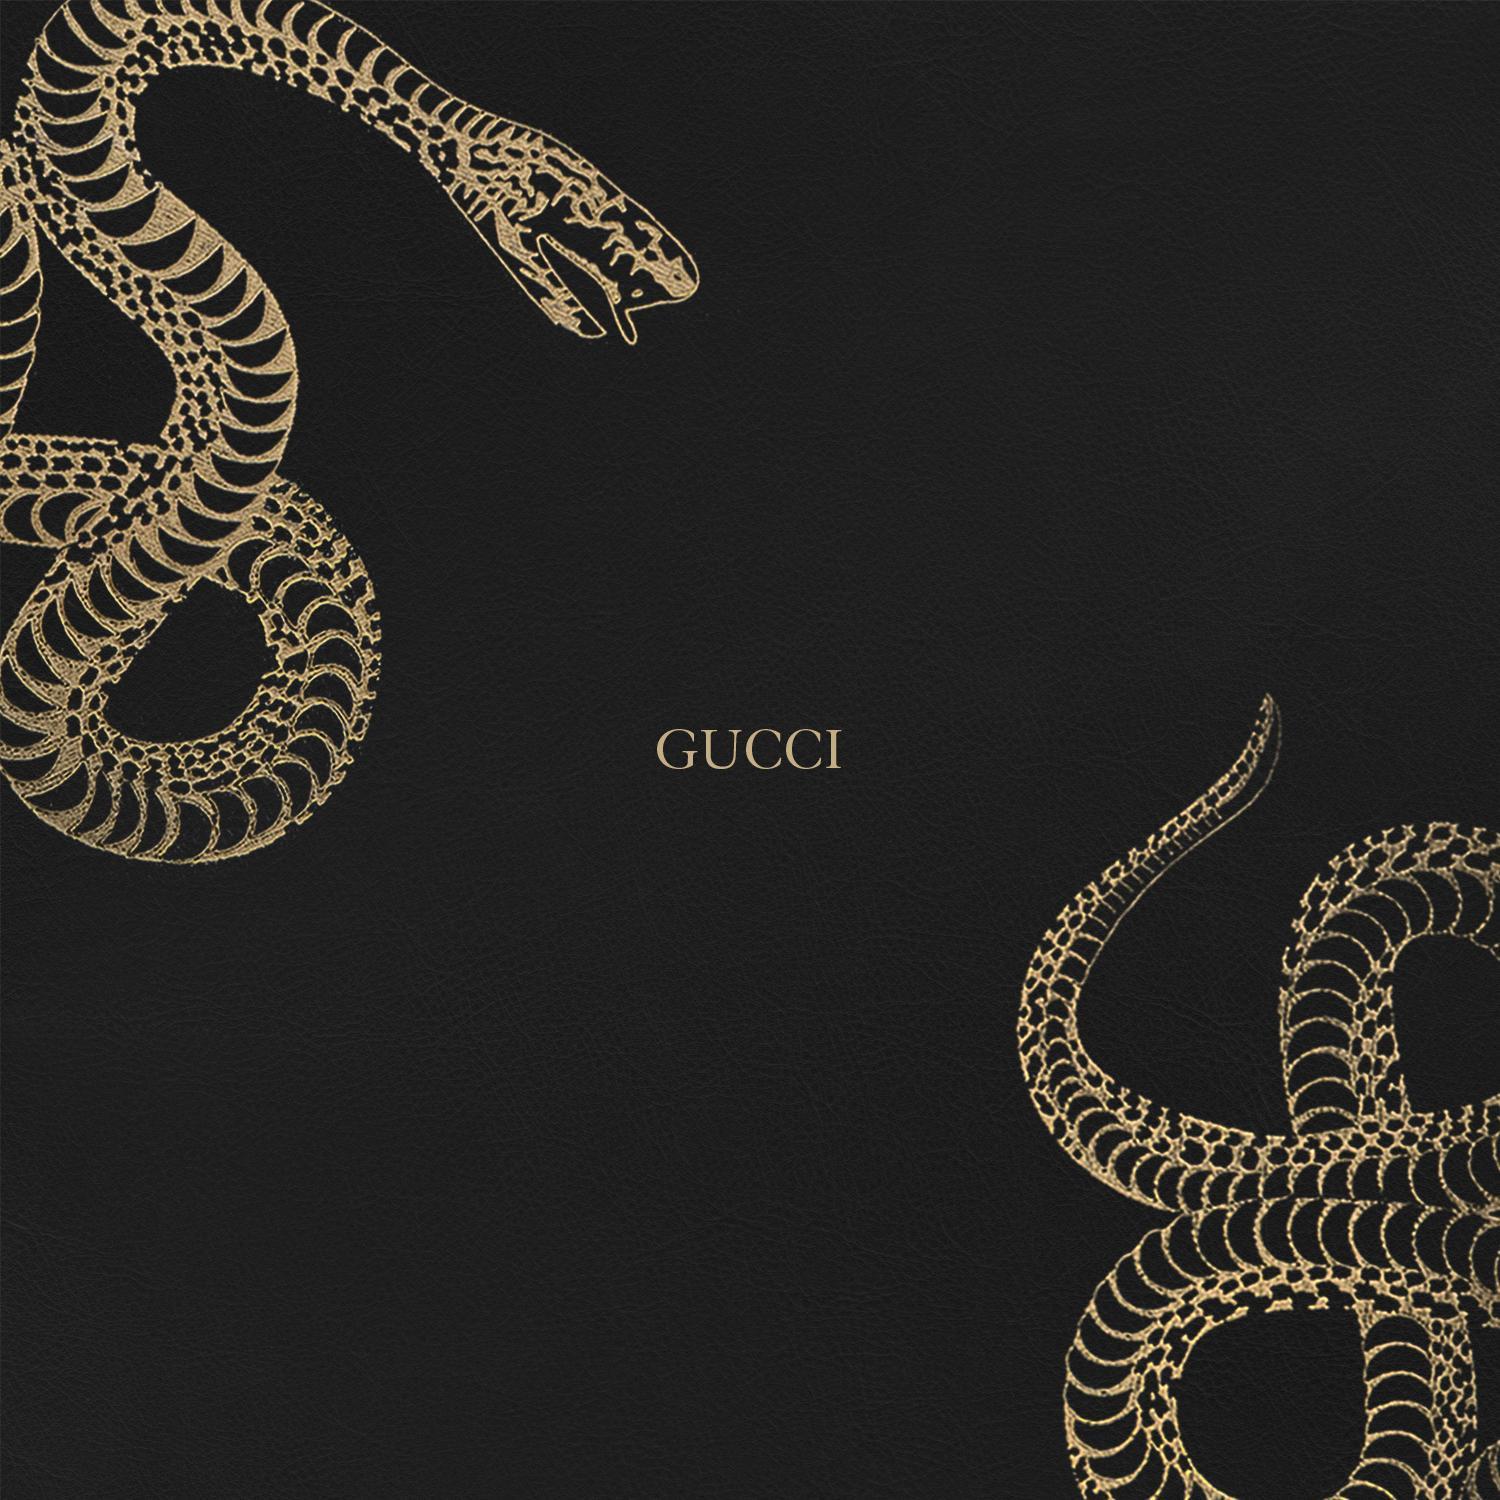 Gucci Snakes Logo - Gucci Snake Wallpapers - Wallpaper Cave